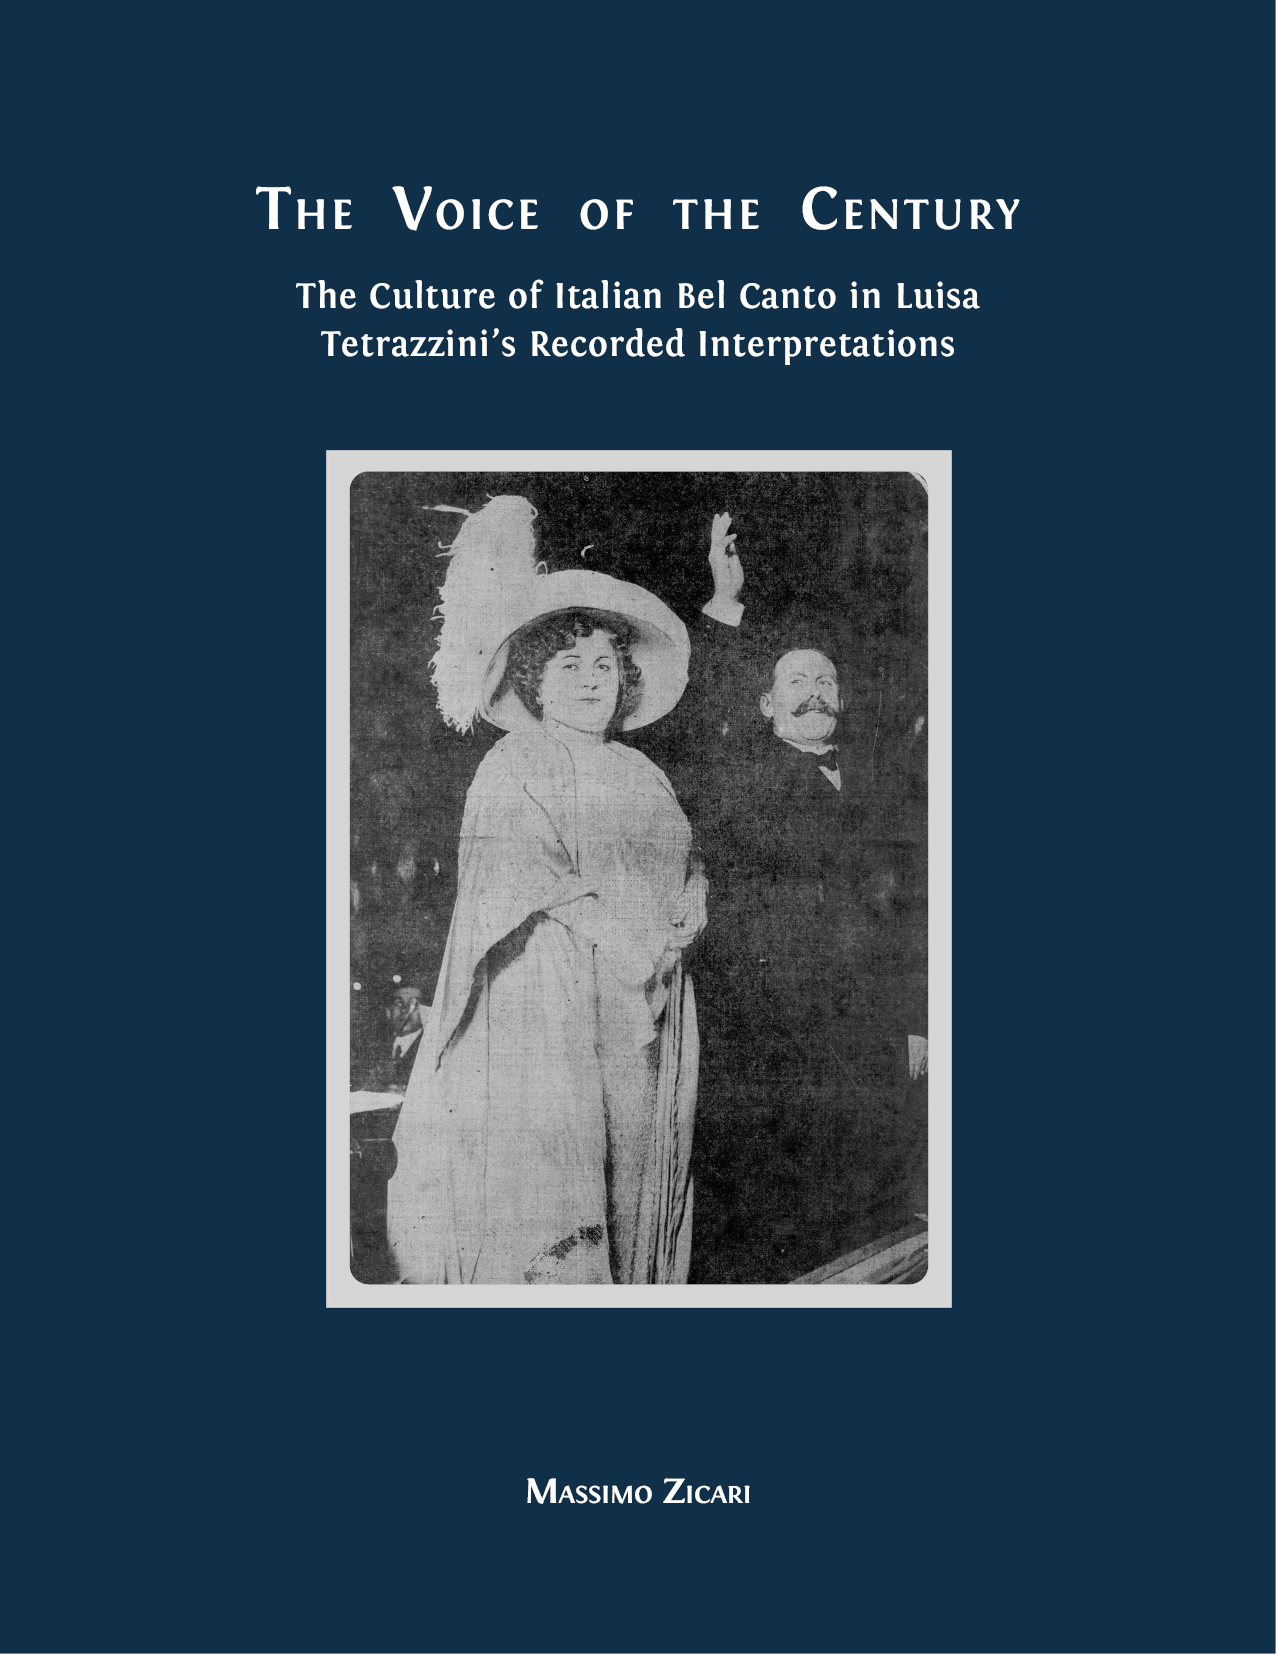 The Voice of the Century book cover image